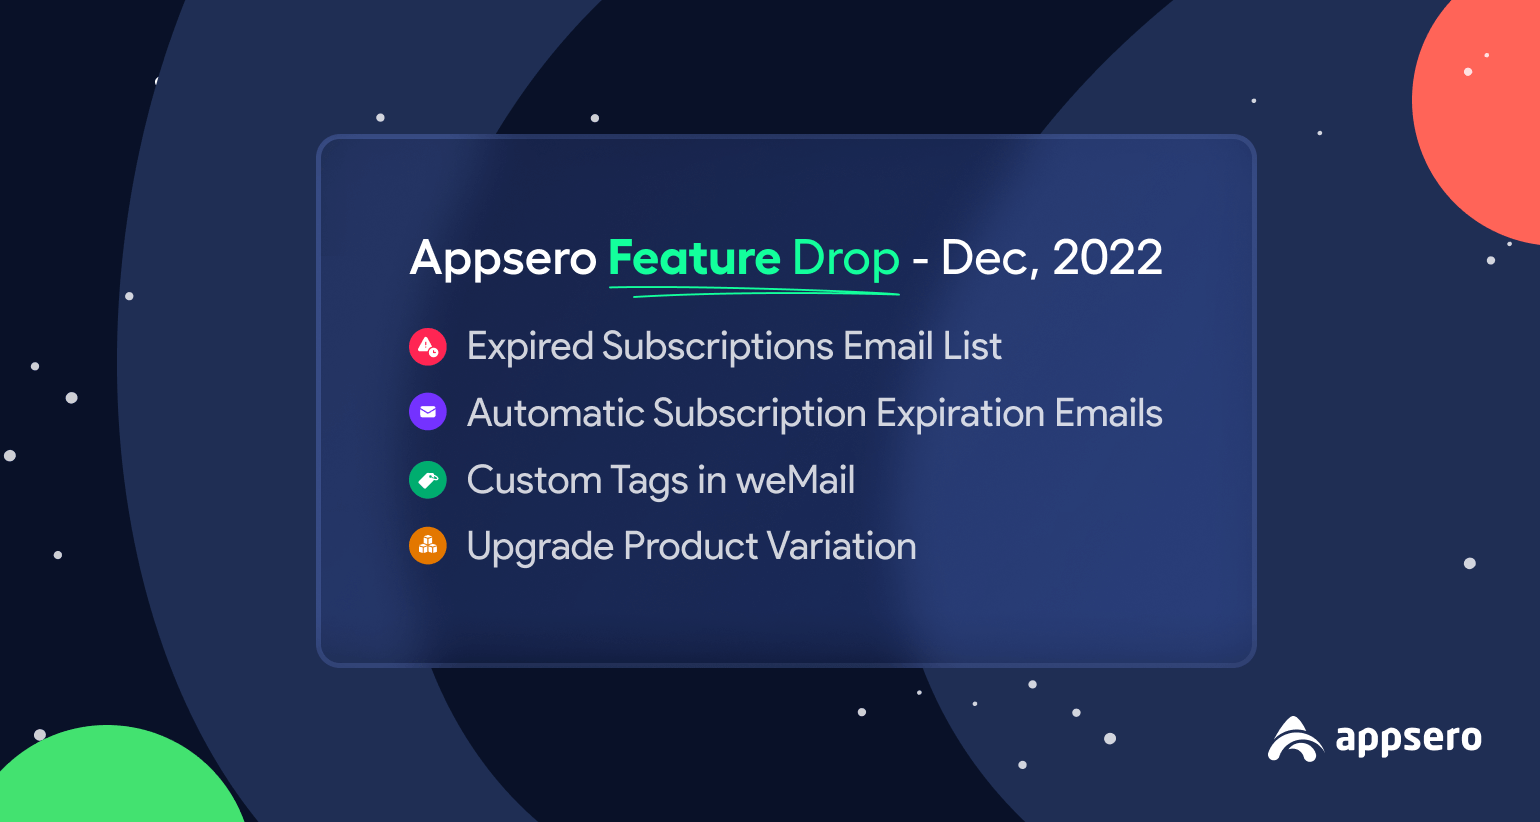 Feature Release 🎉: Automatic subscription expiration emails, custom tags in weMail, product variation upgrades, and more 1